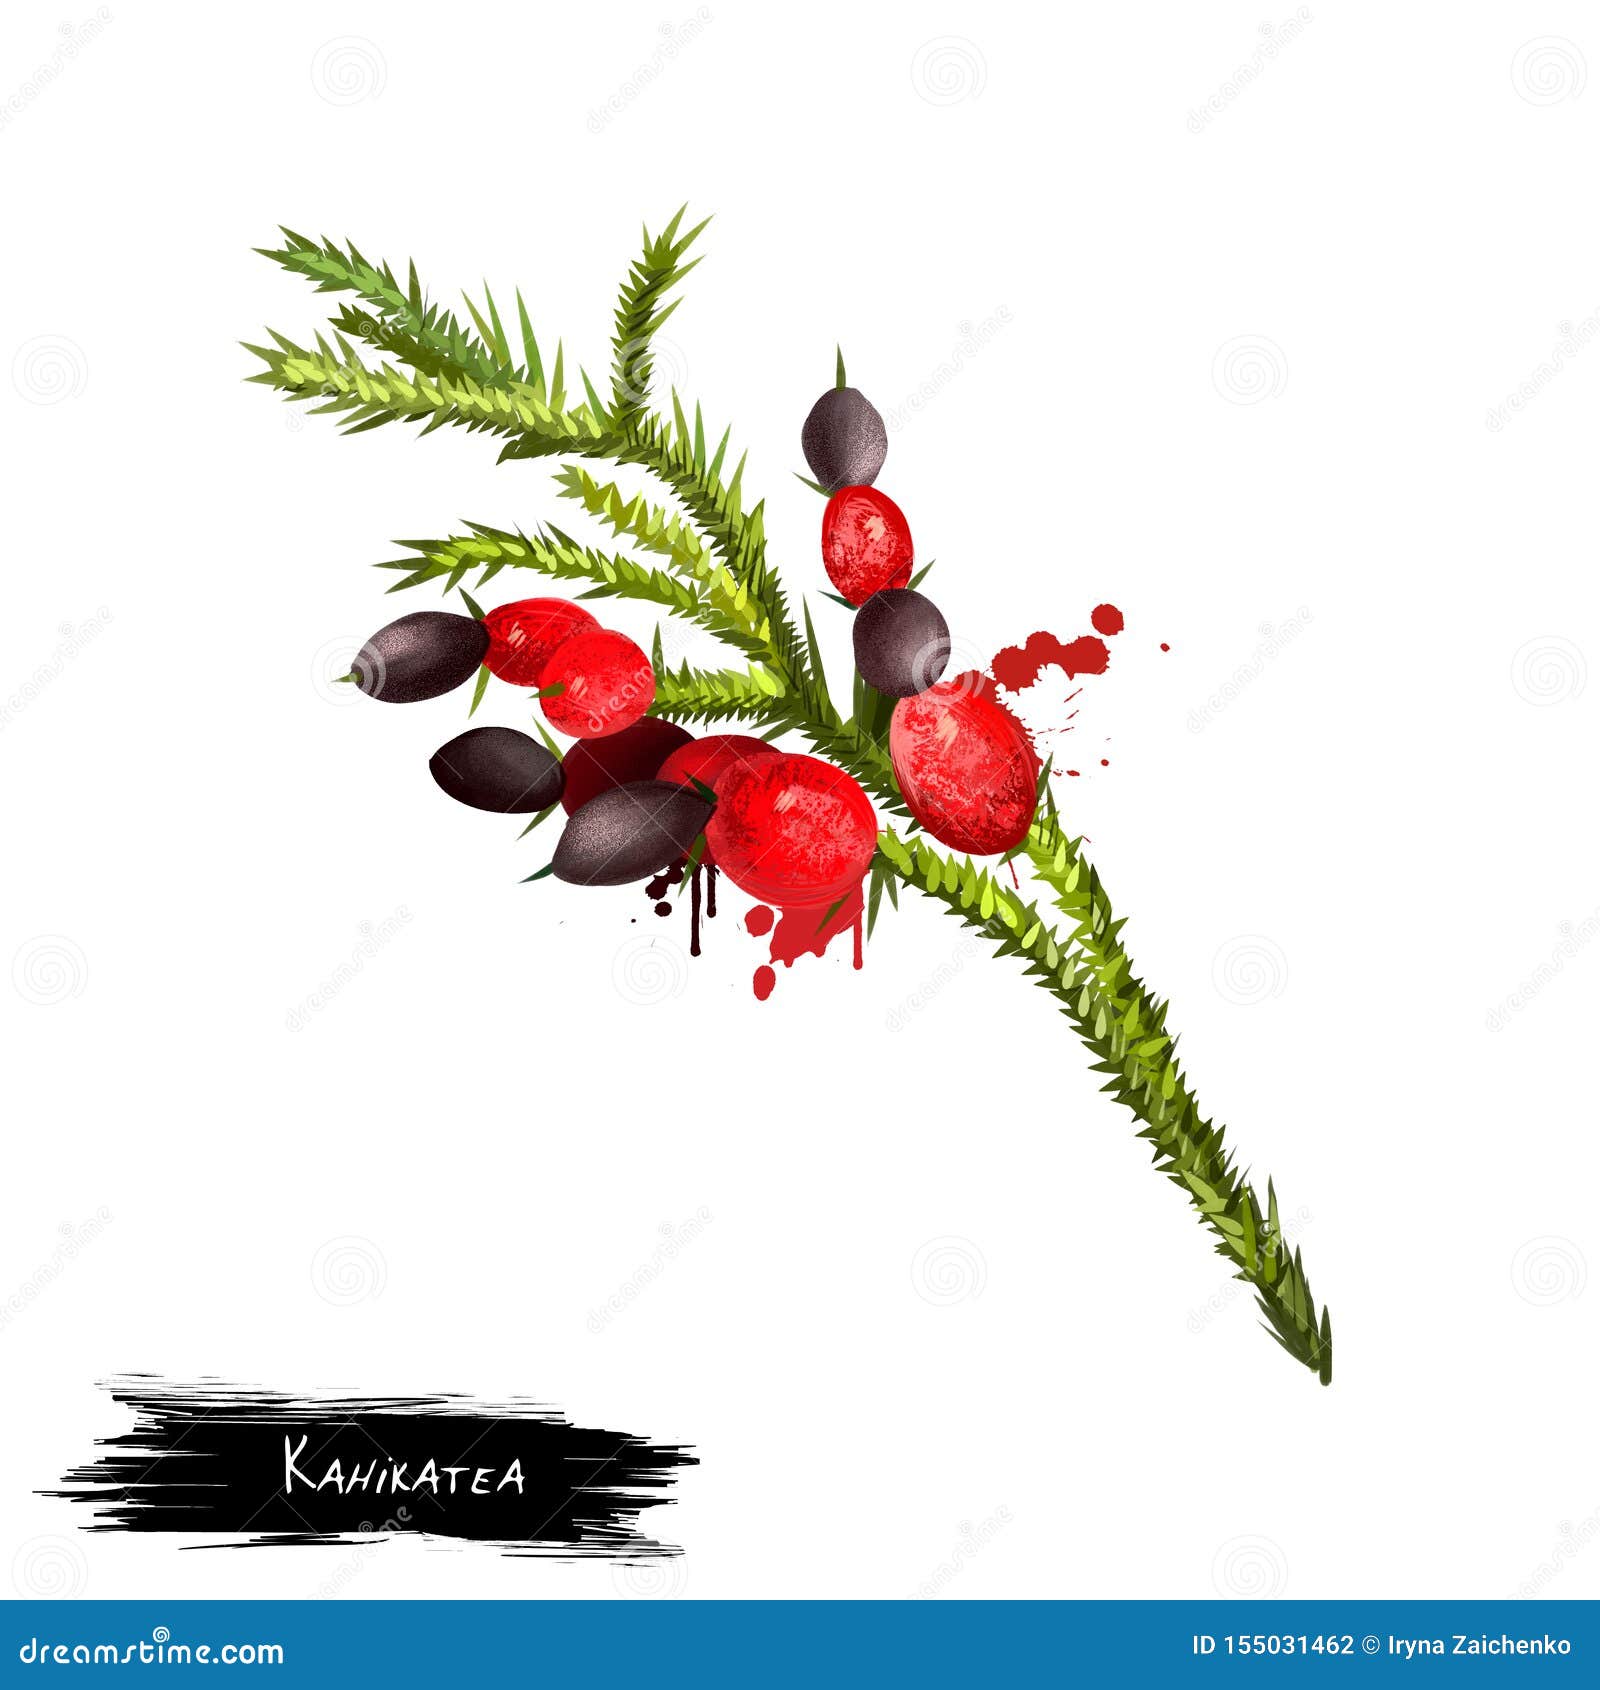 Dacrycarpus dacrydioides or kahikatea isolated on white. Used to make boxes for exporting. Cone scales swelling at maturity into an orange to red, fleshy, aril with a single apical seed. Digital art